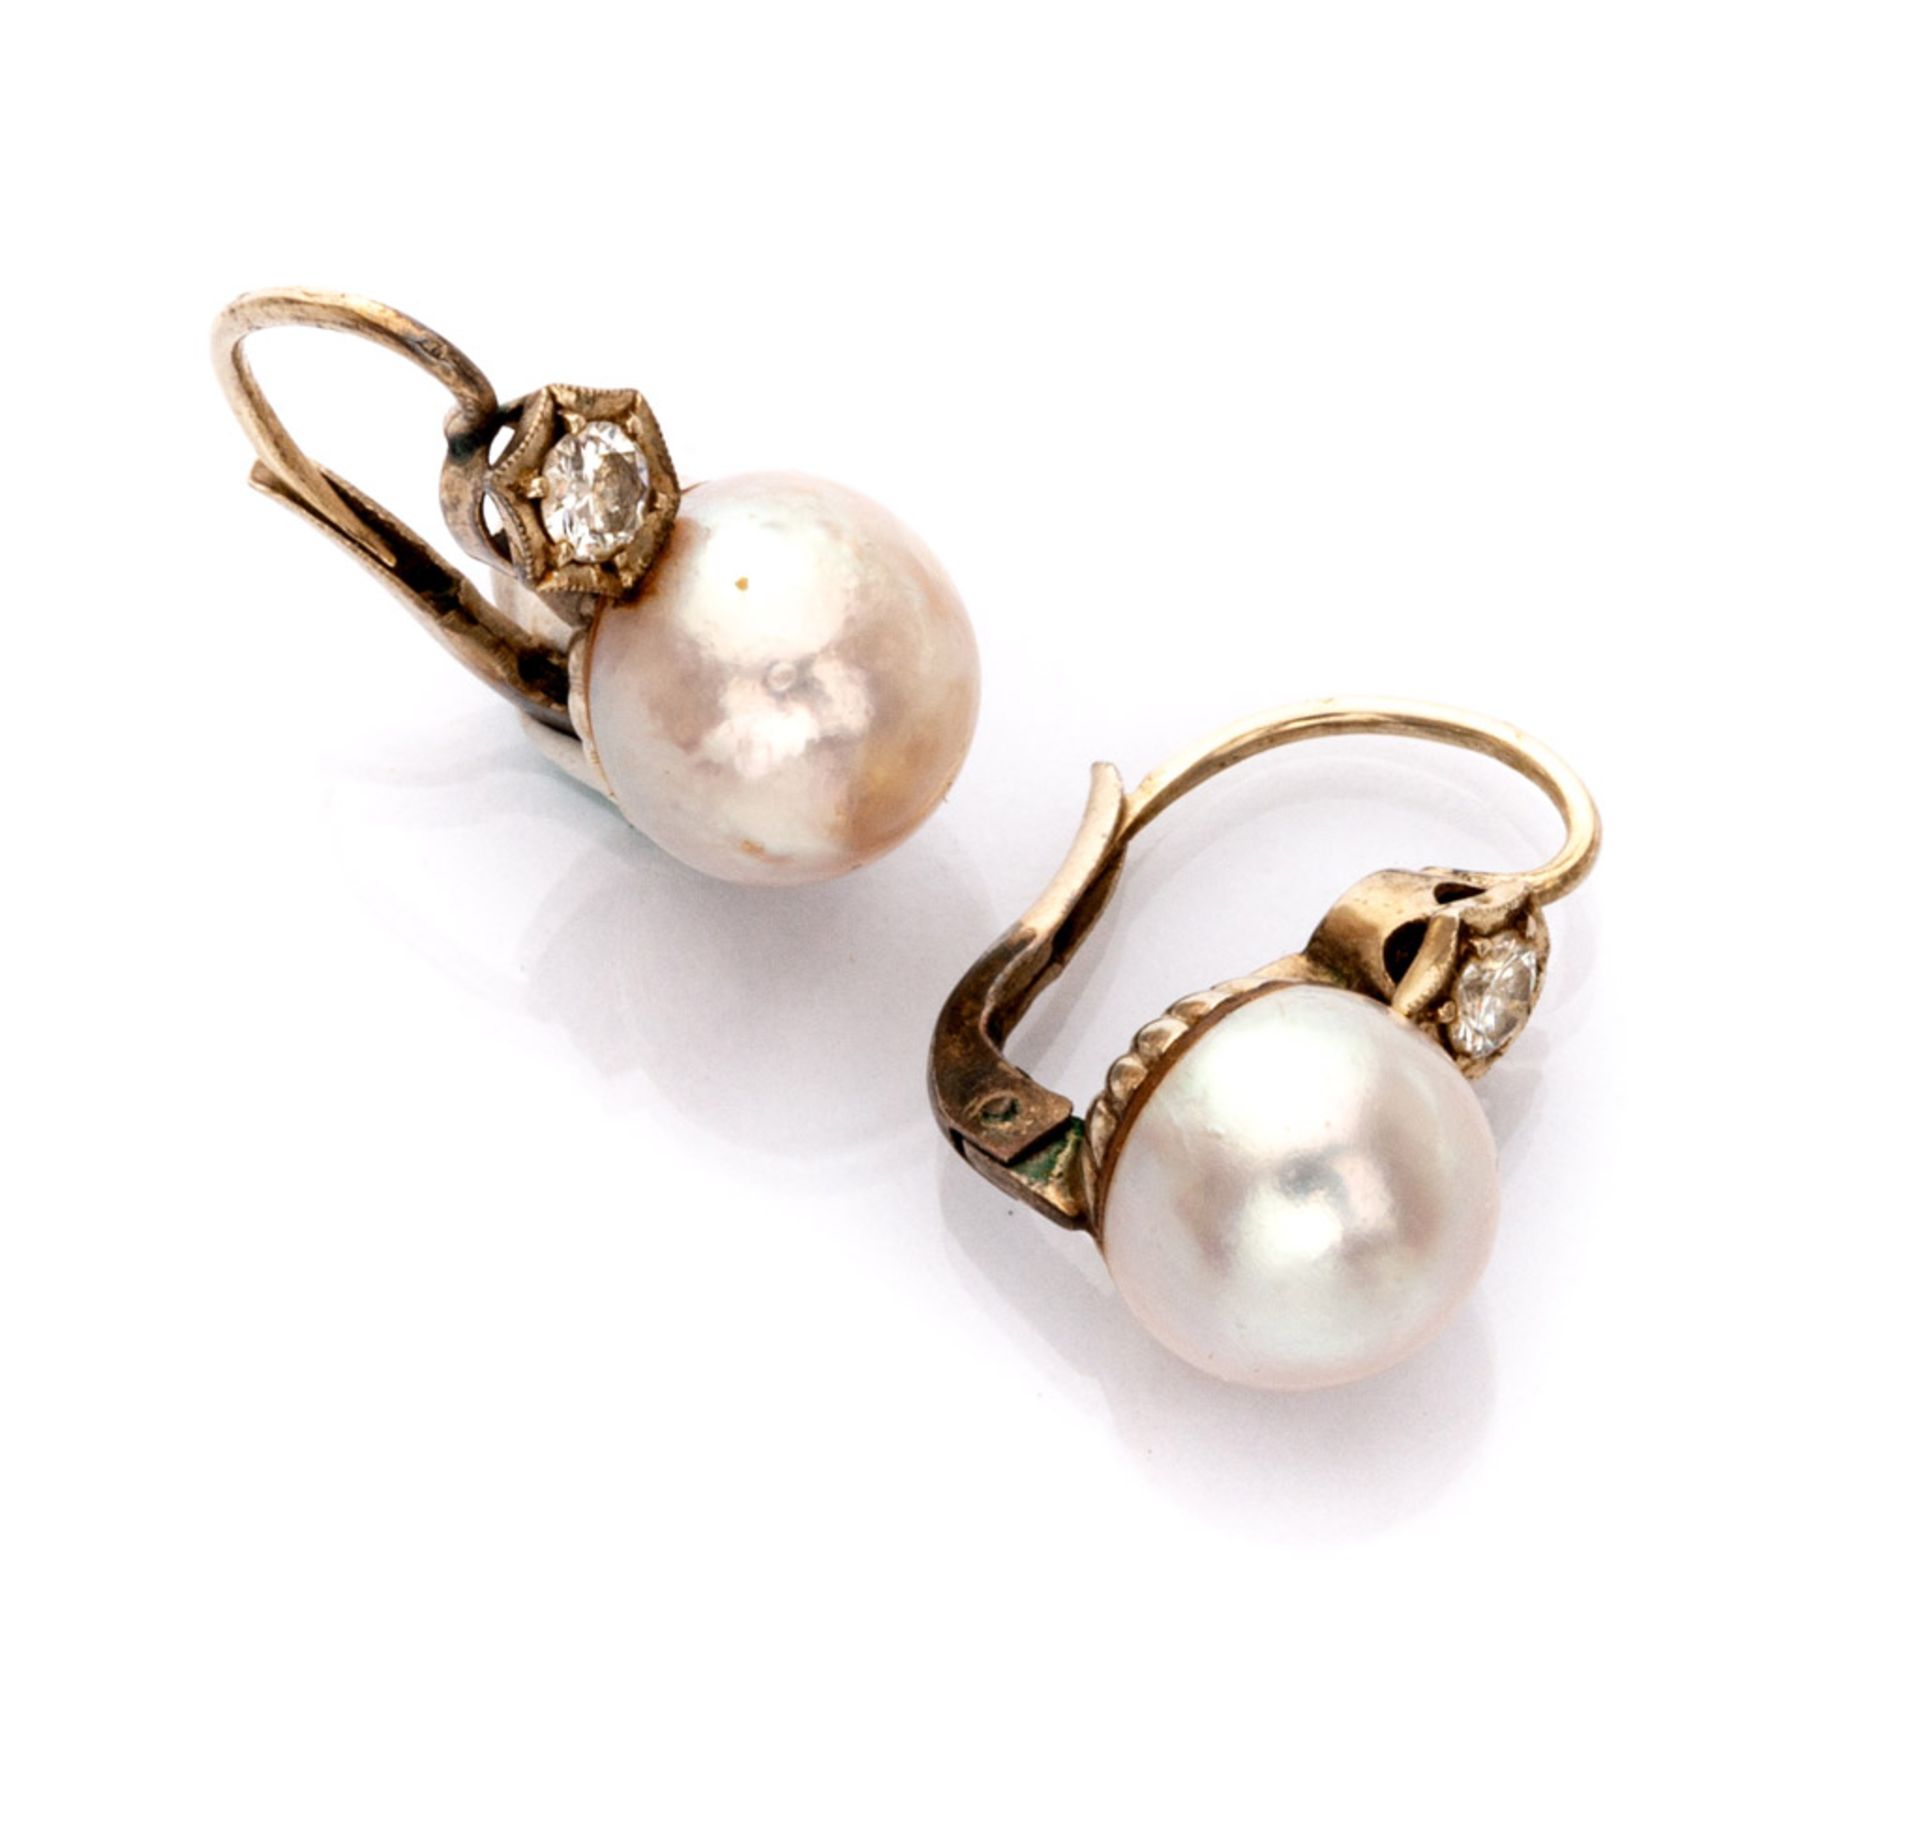 PAIR OF EARRINGS in white gold 18 kts. with pearls and two diamonds. Total weight gr. 4,70. COPPIA